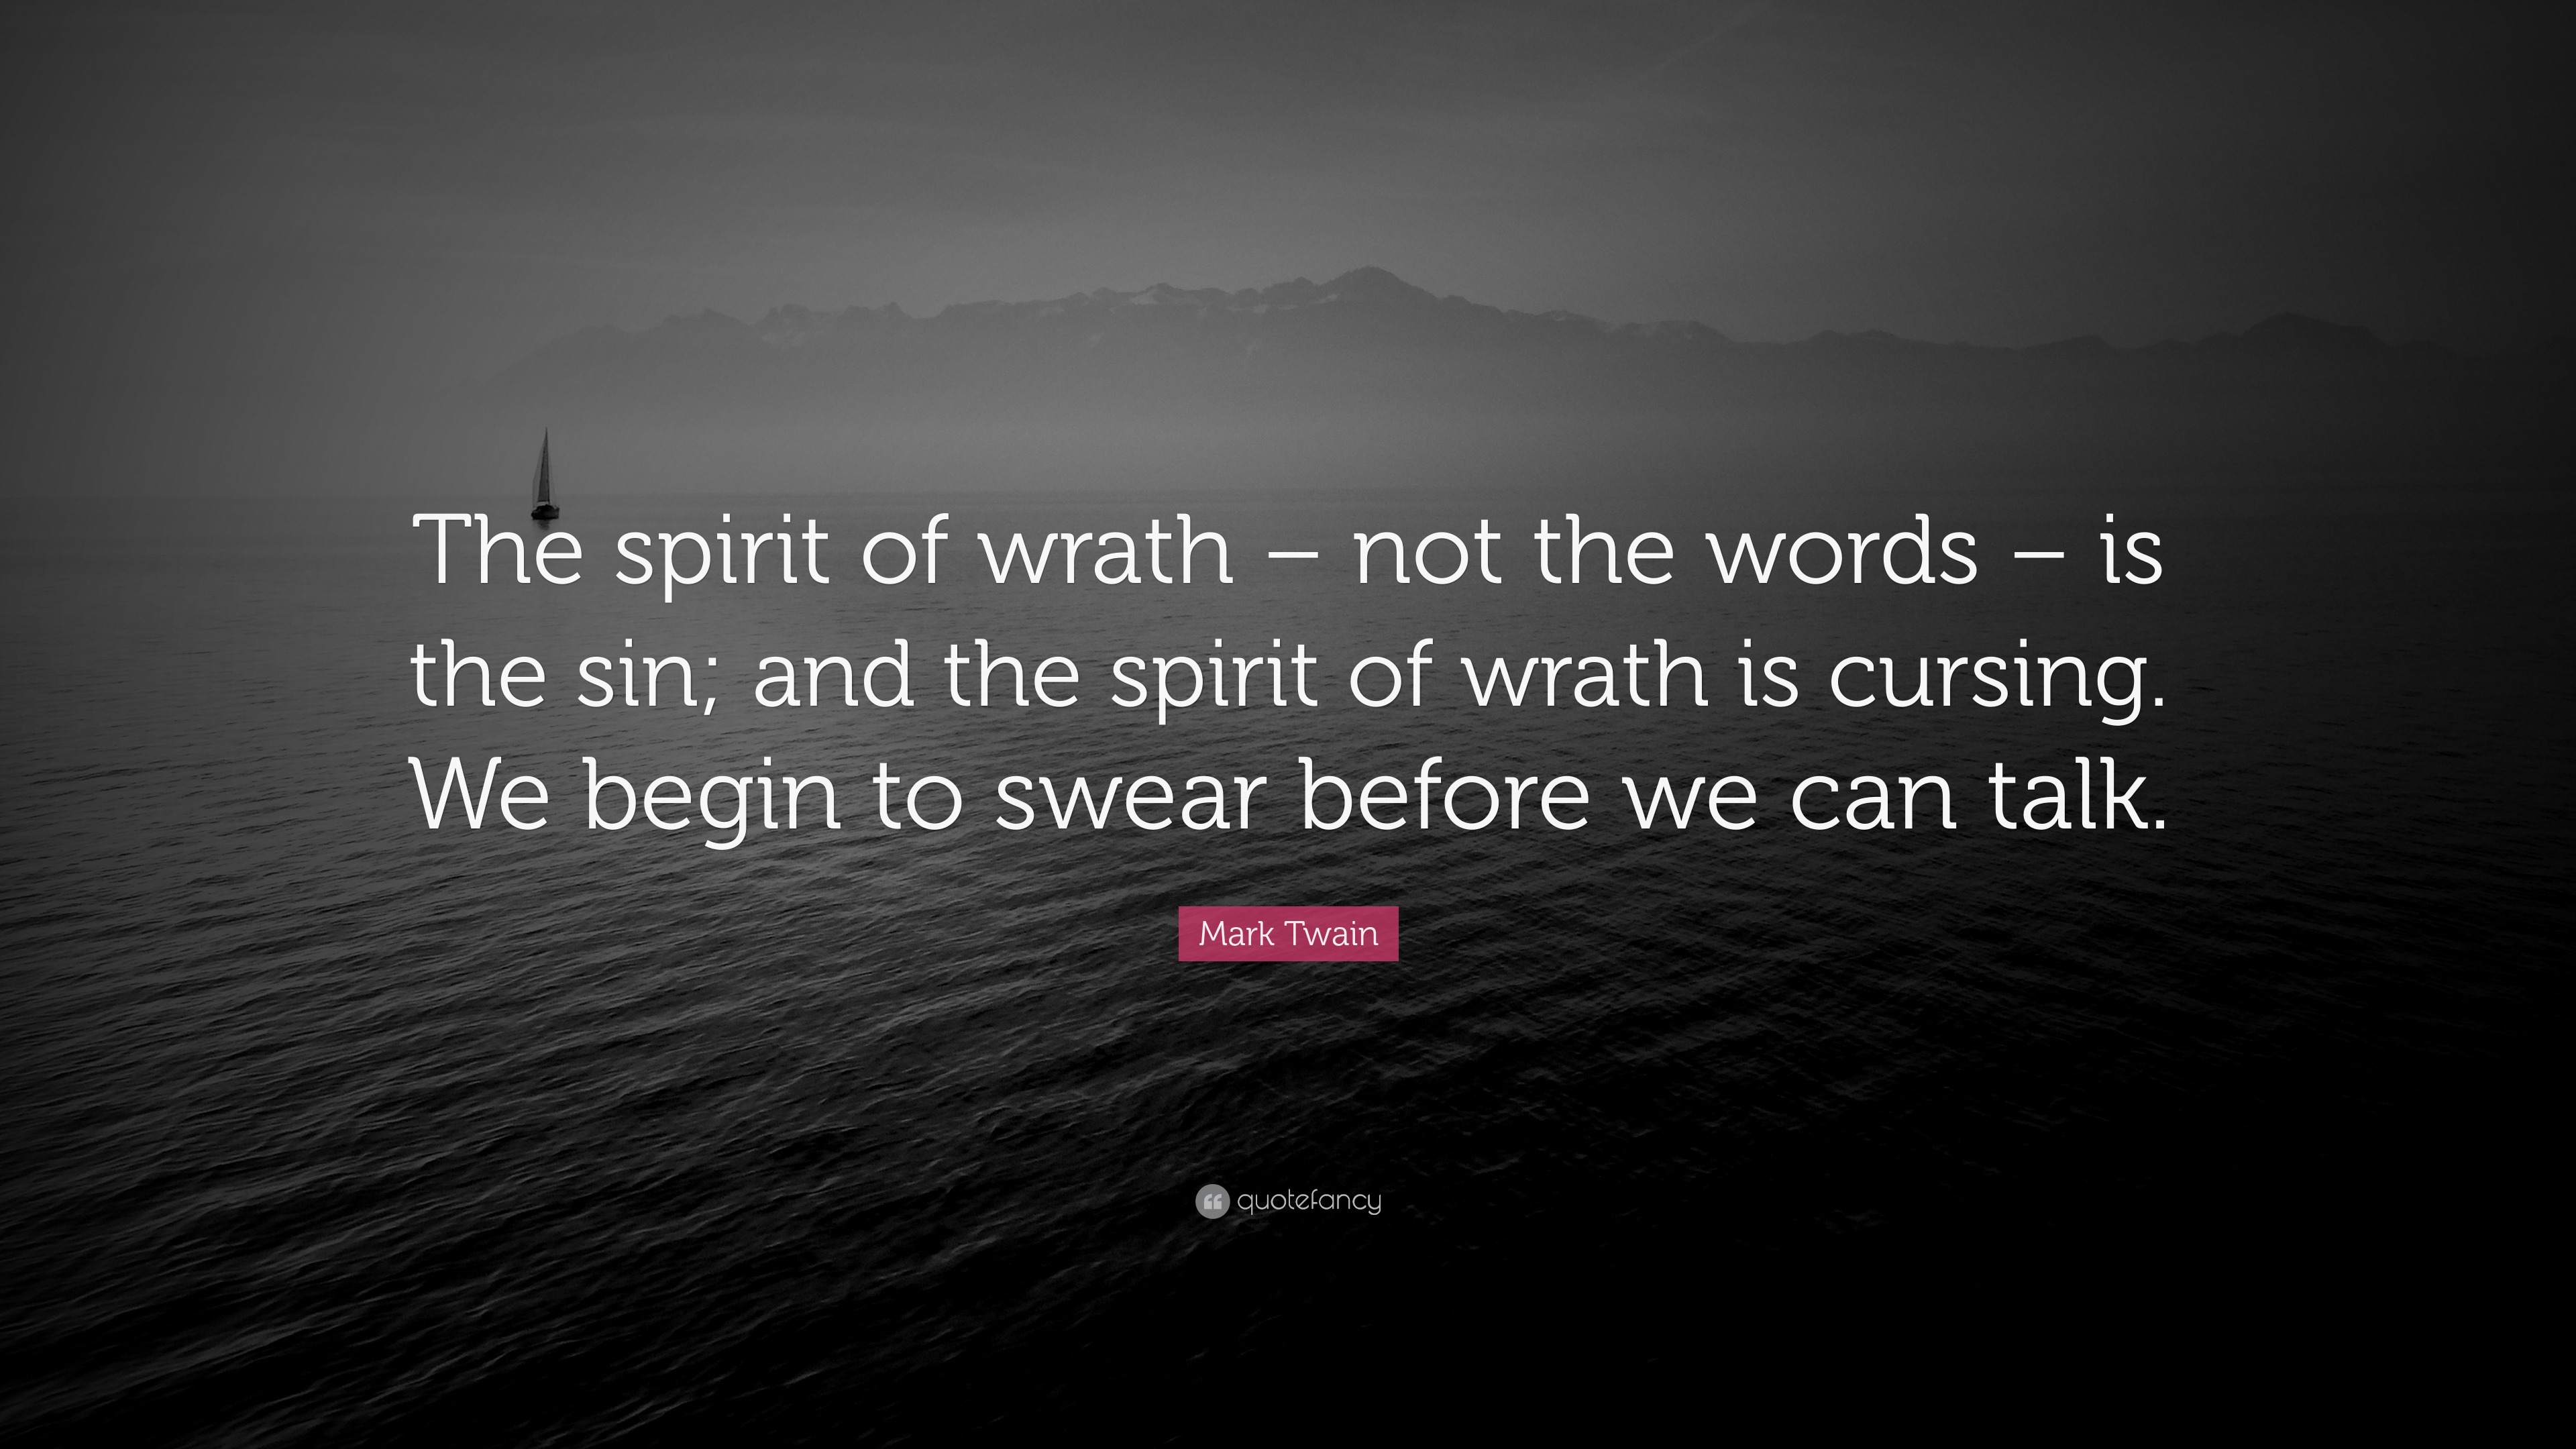 Mark Twain Quote: “The spirit of wrath – not the words – is the sin; and  the spirit of wrath is cursing. We begin to swear before we can ta...”